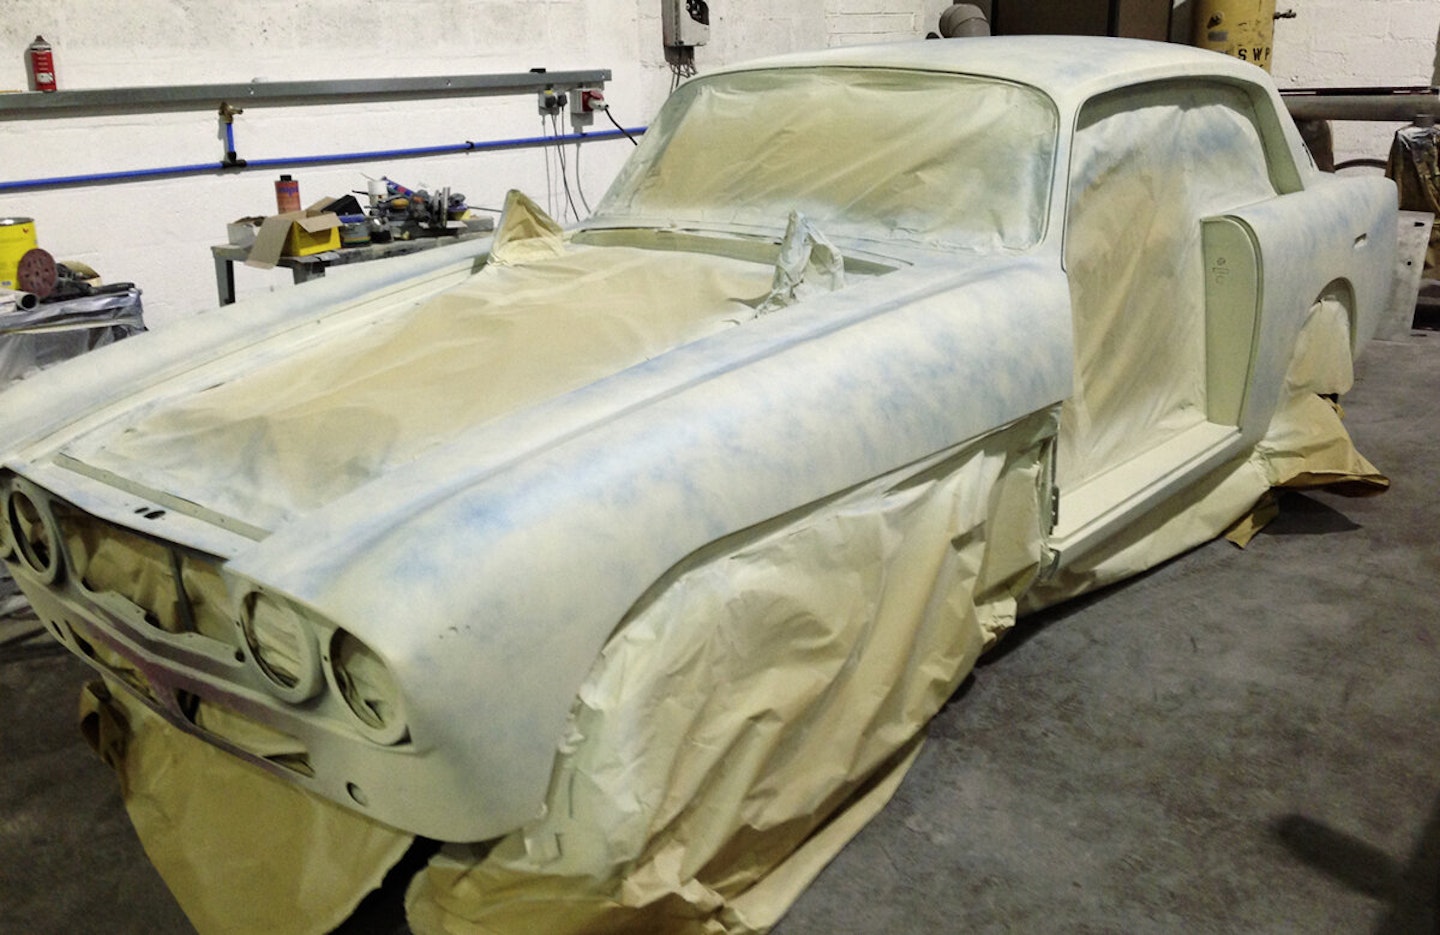 Aluminum panels meant etch primers were essential on bare metal to avoid the paint lifting at a later date